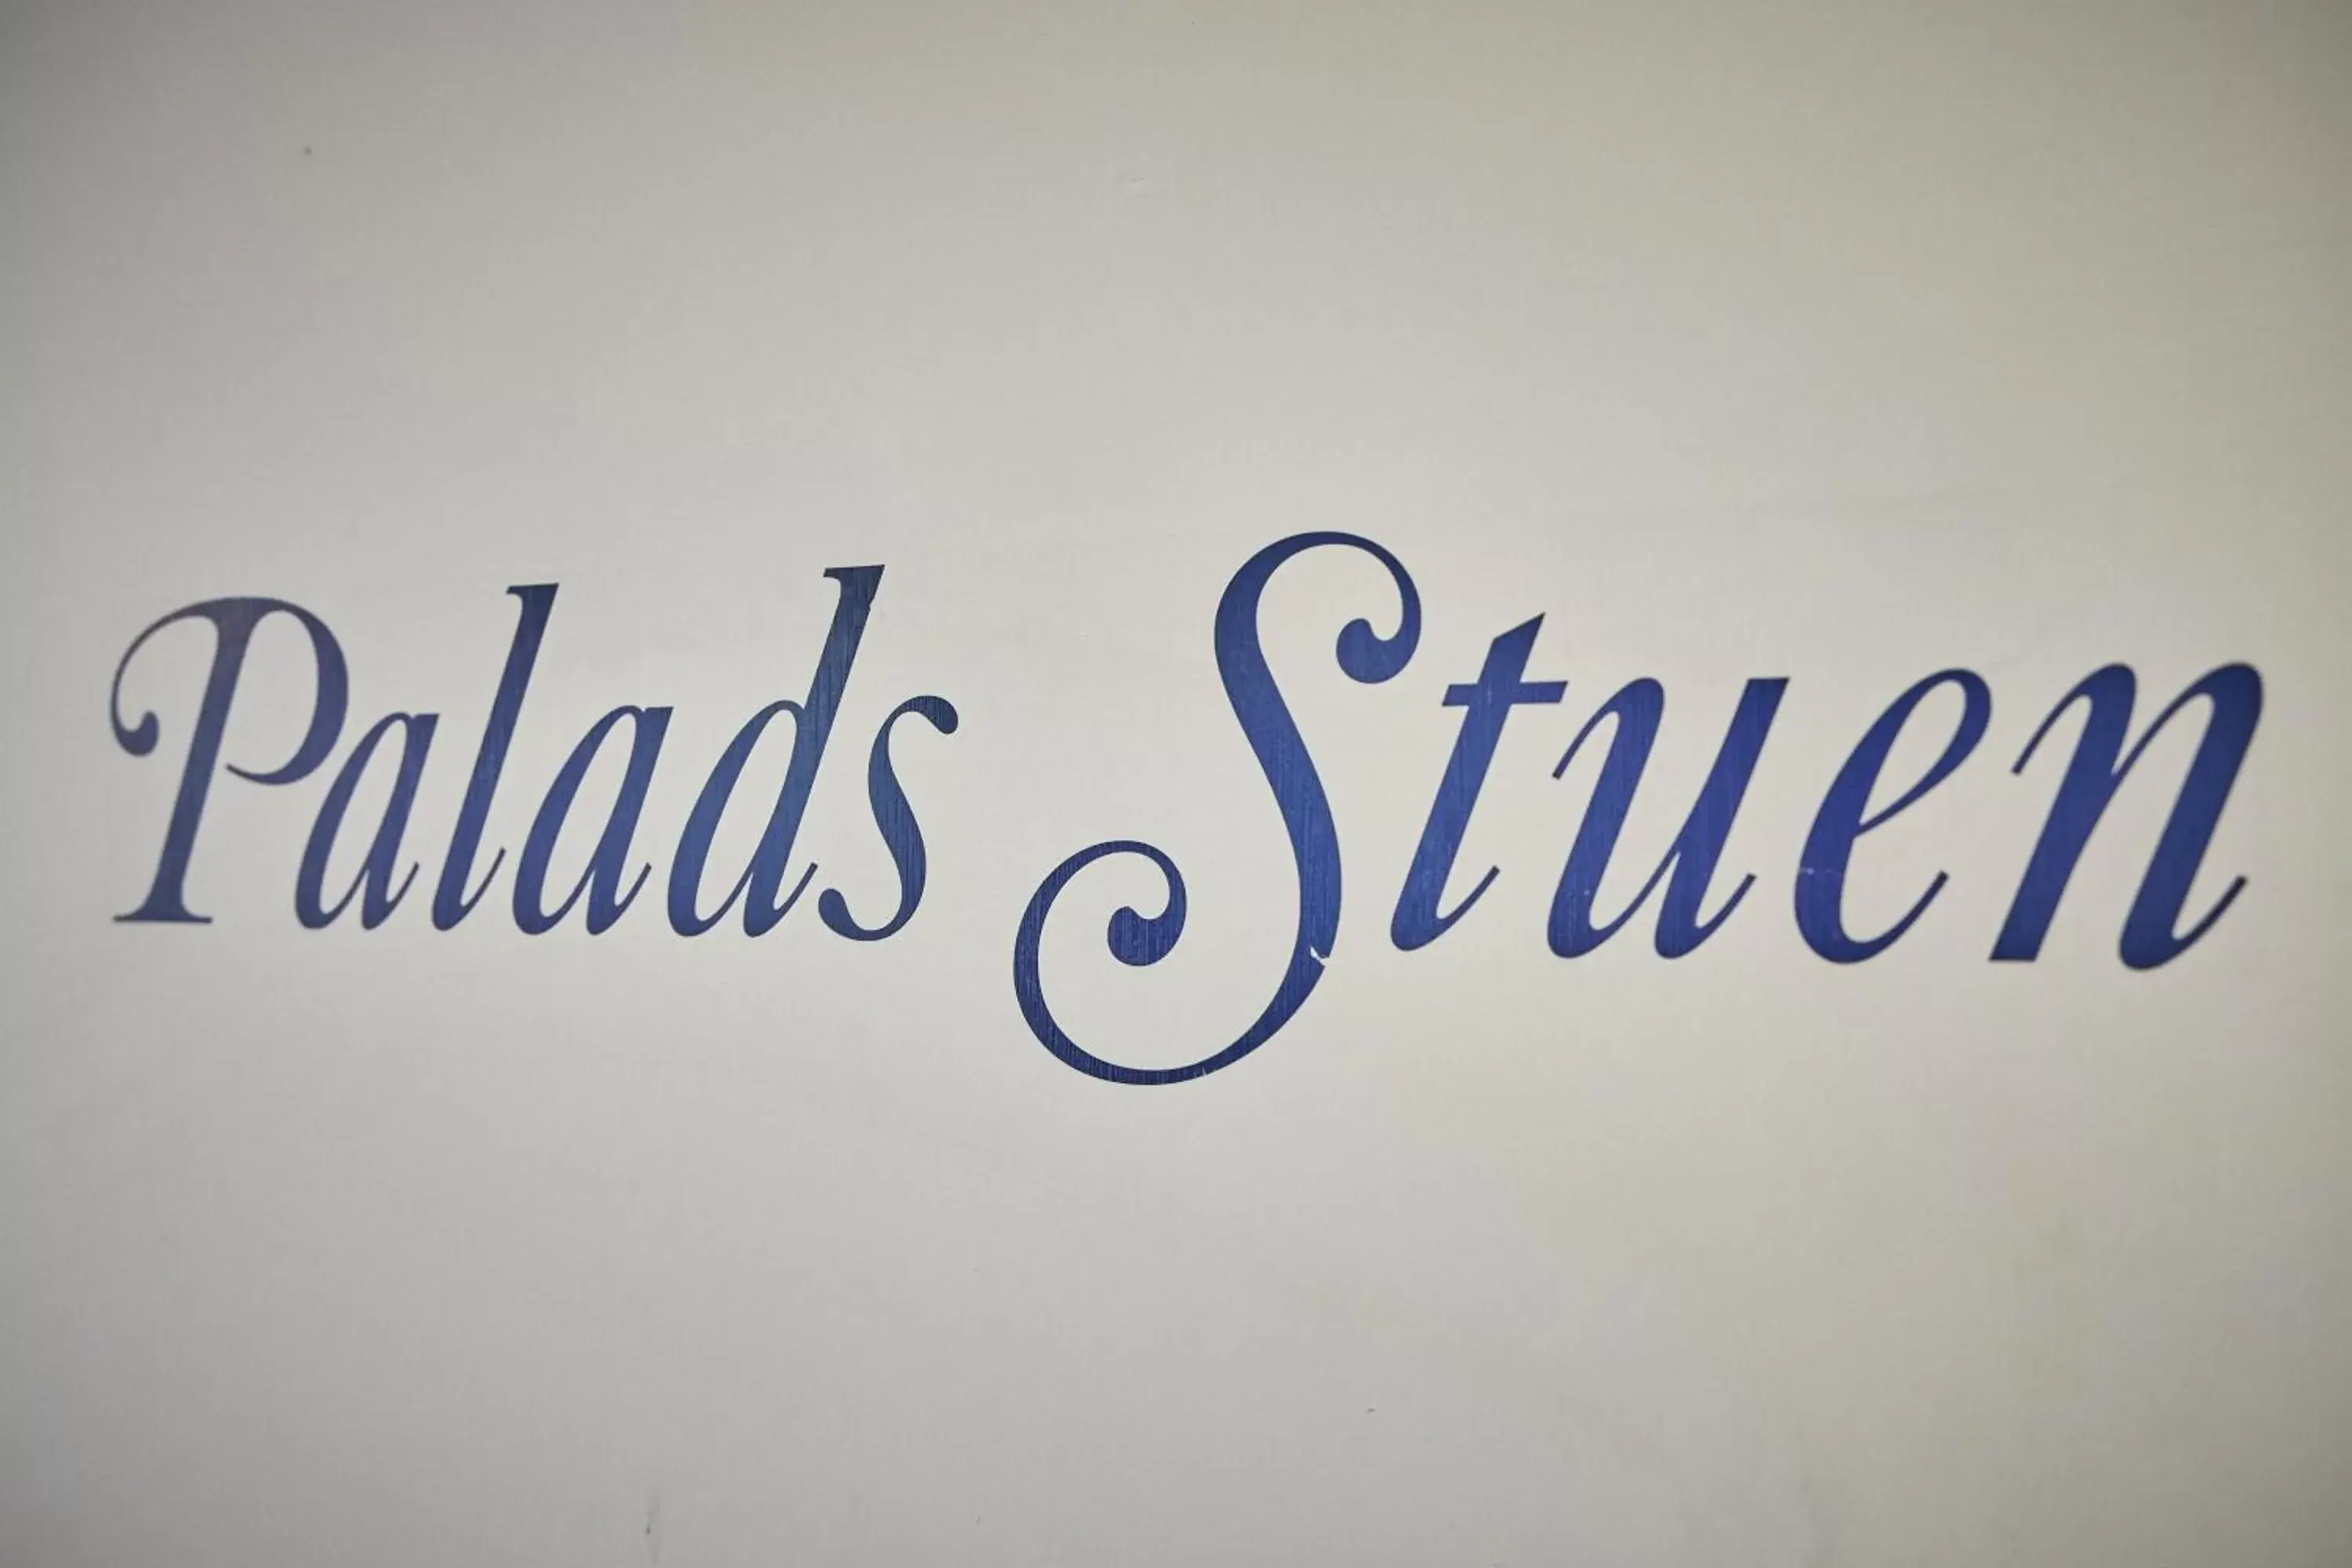 Logo/Certificate/Sign, Property Logo/Sign in Palads Hotel